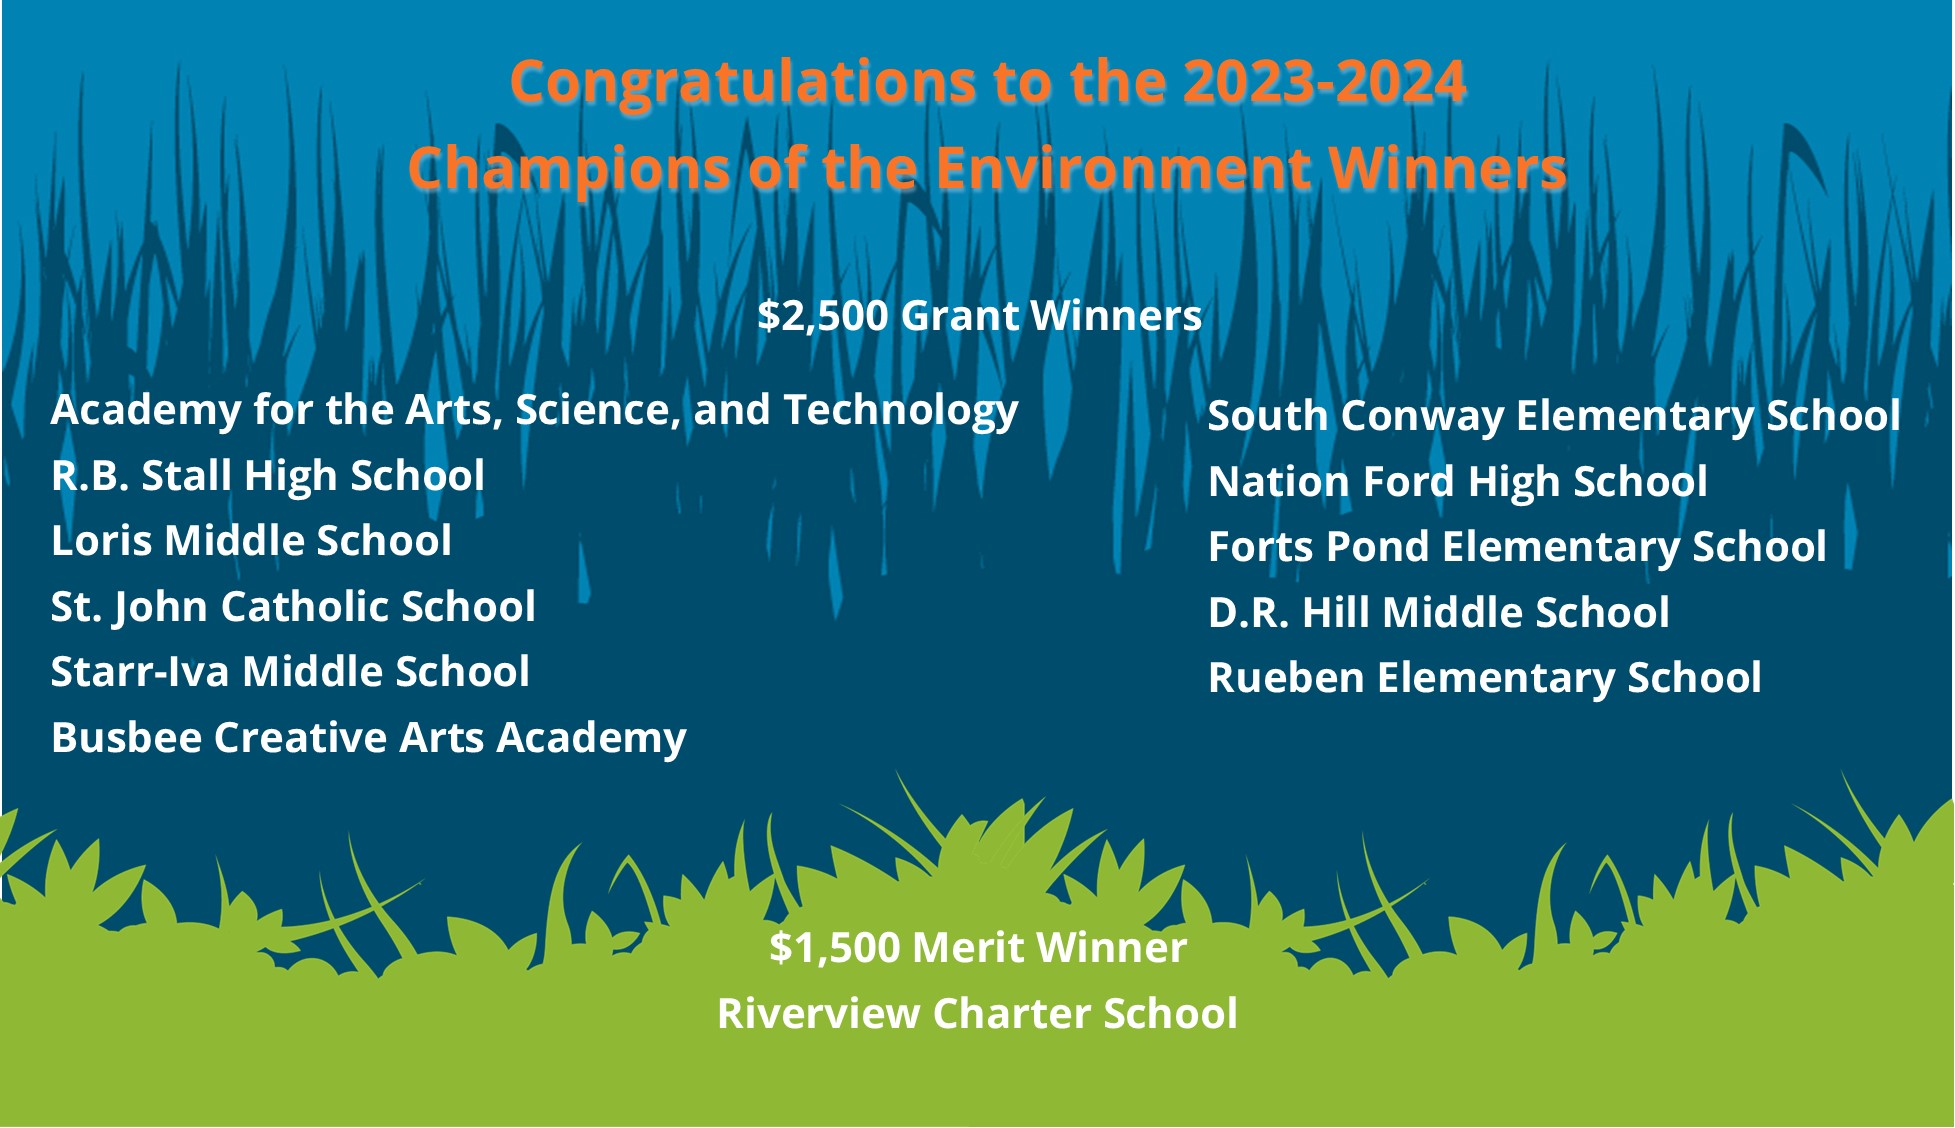 2023-2024 Champions of the Environment Winners list graphic